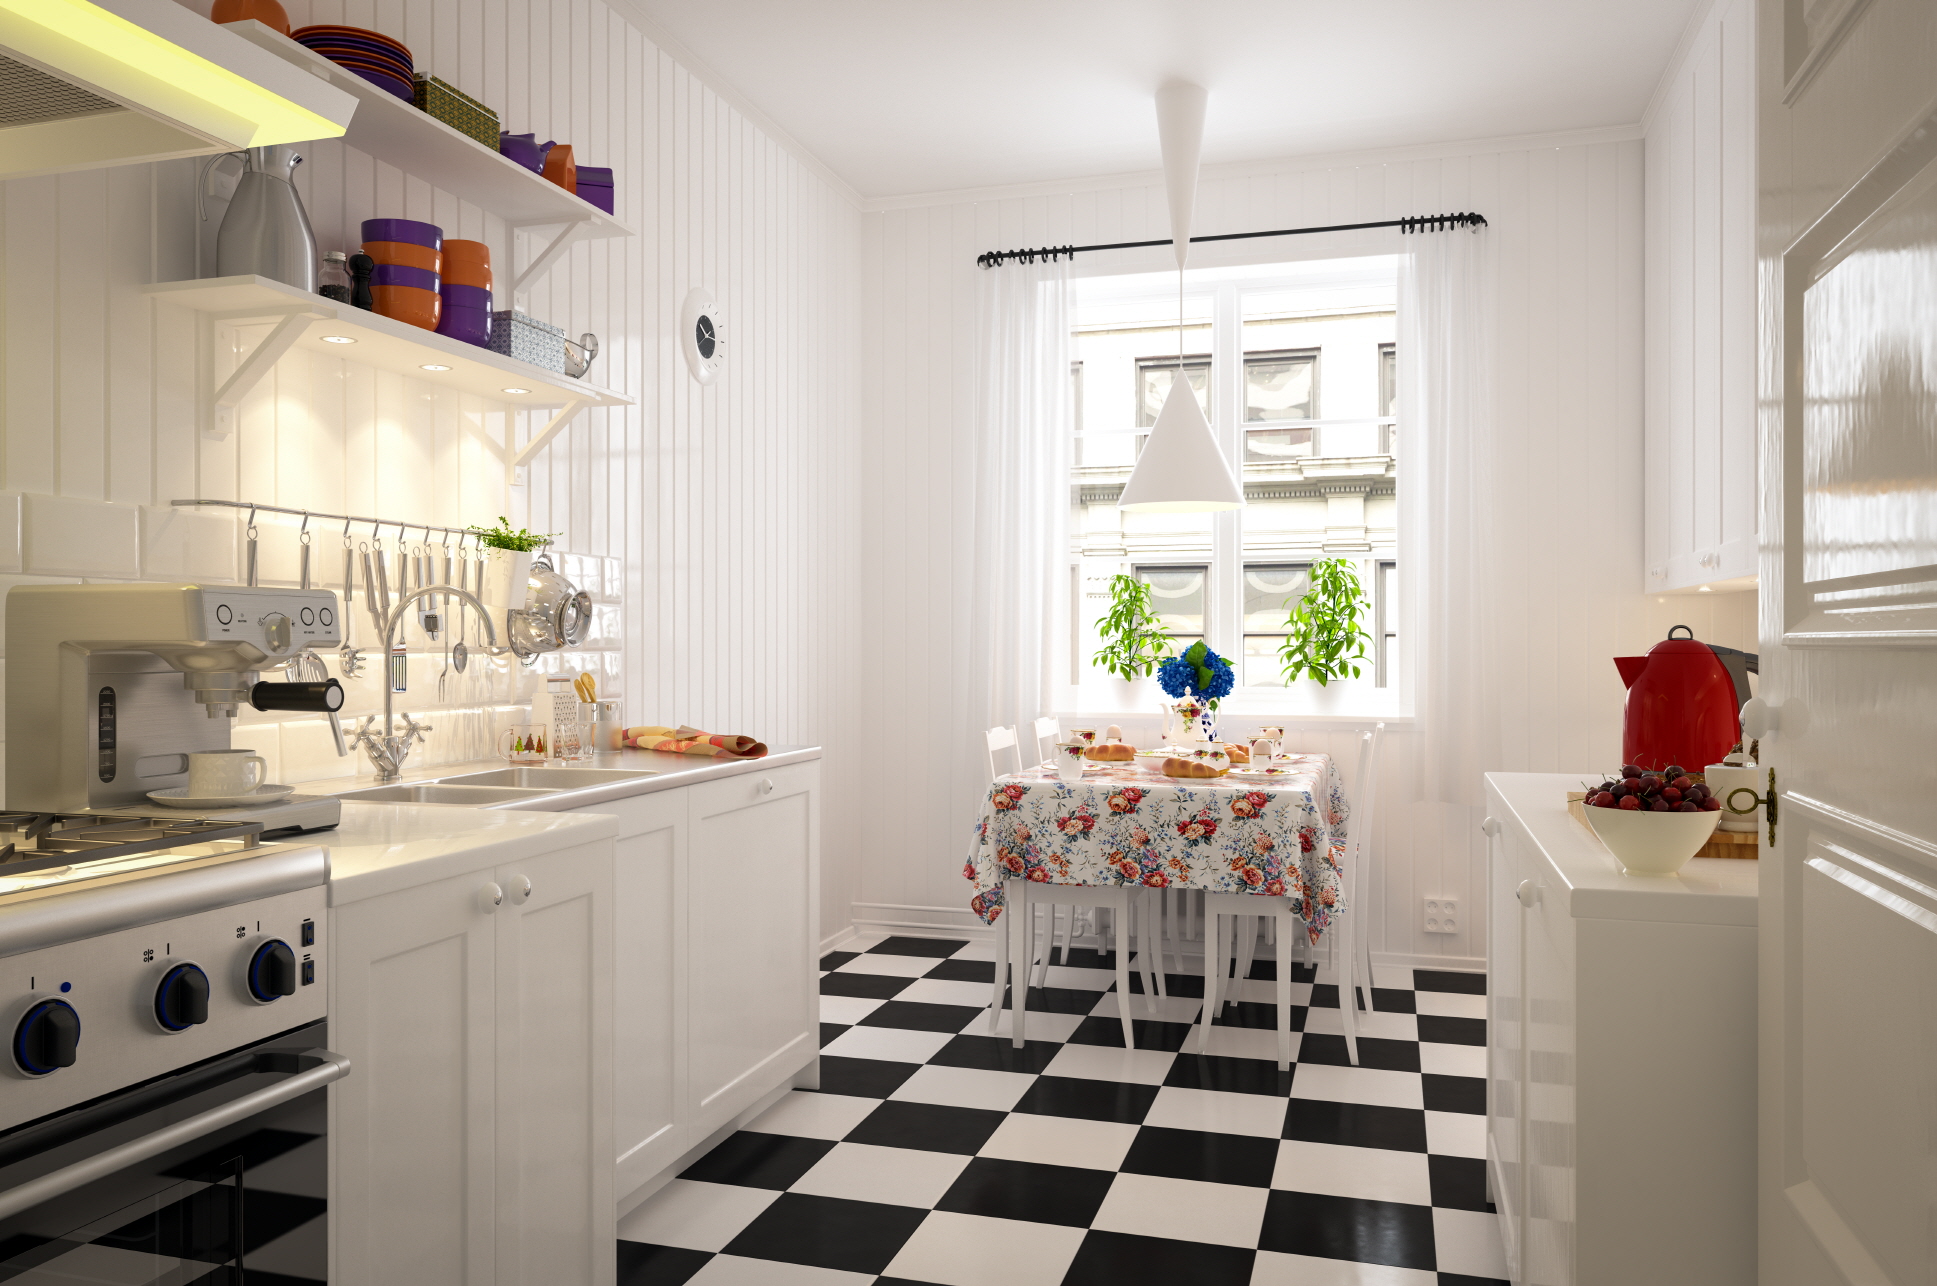 Infuse personality into your small kitchen with bold floor designs like patterned tiles or colorful rugs.